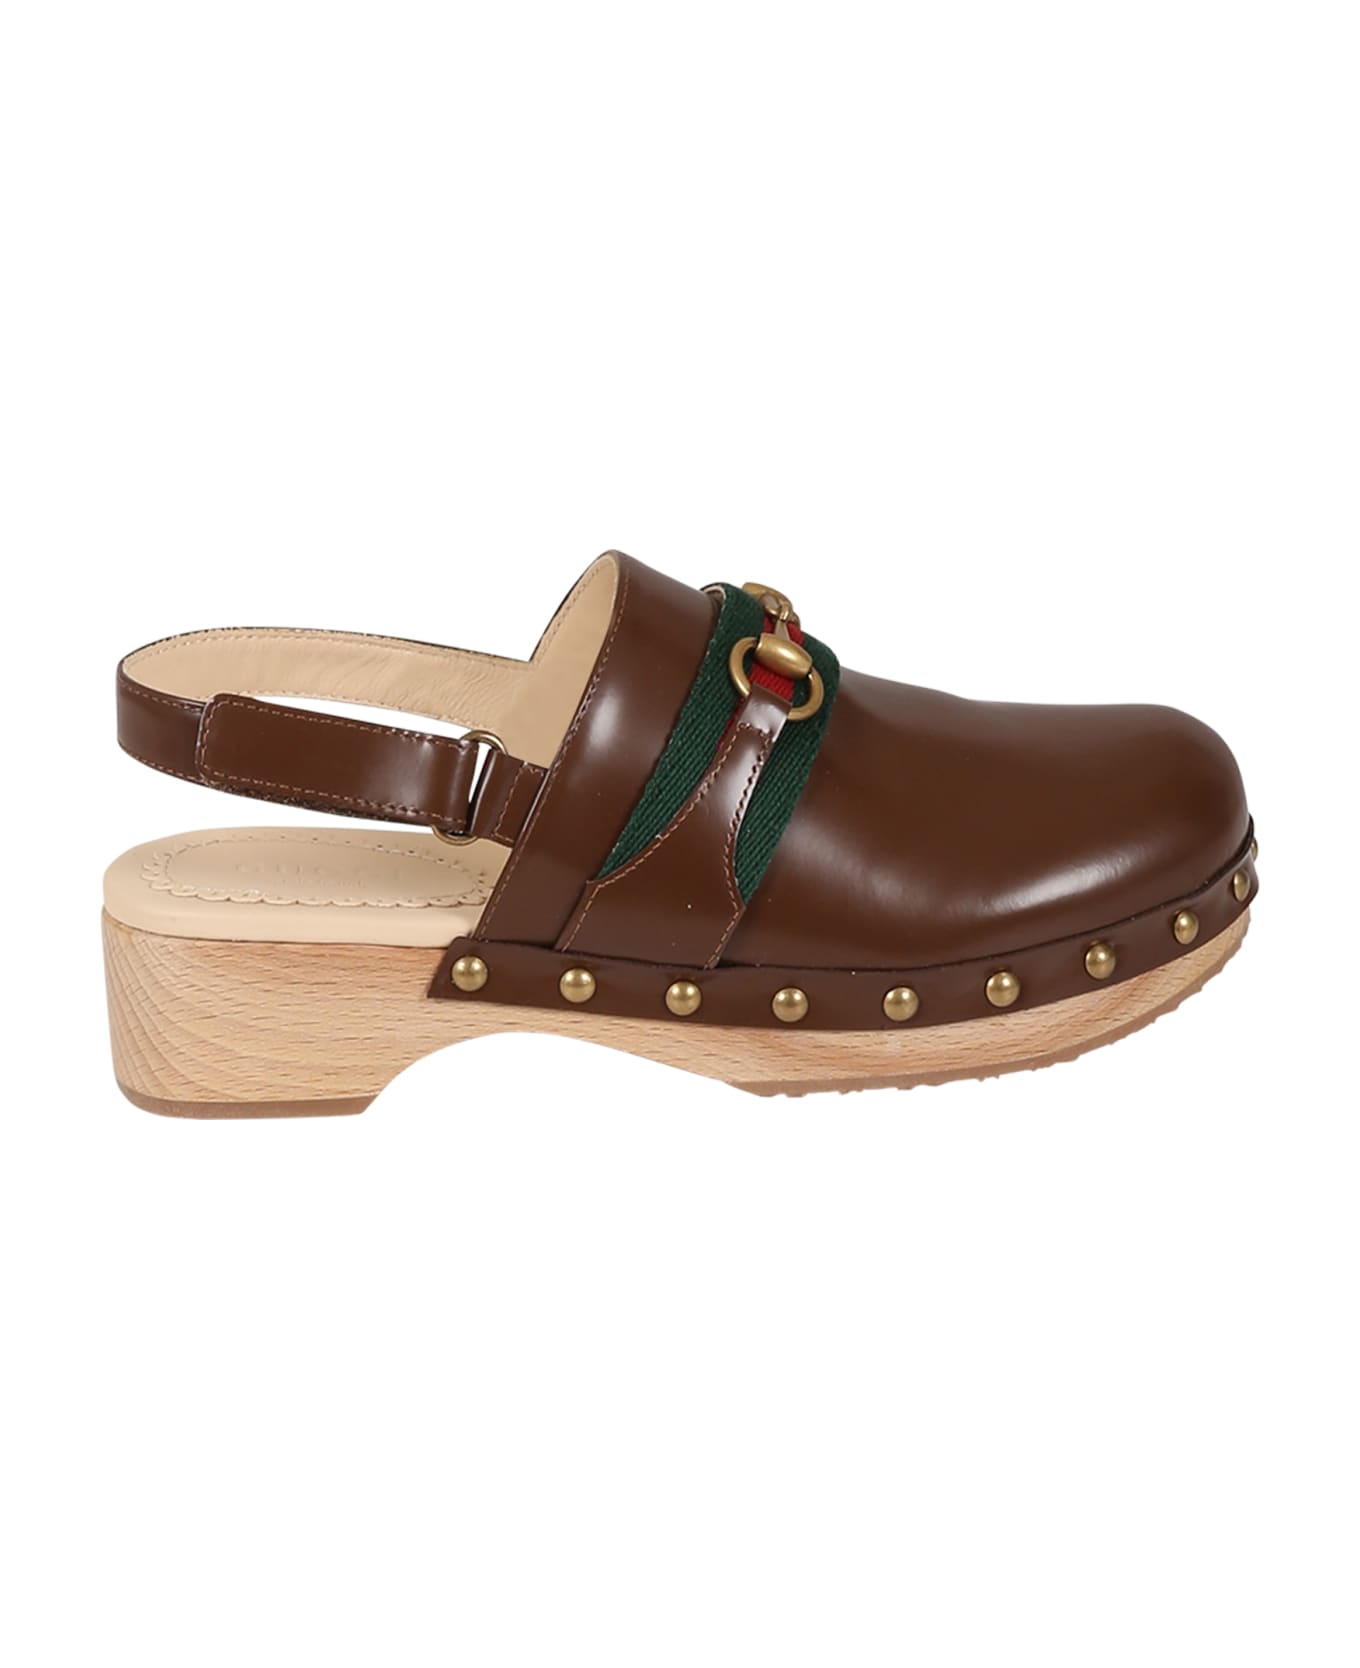 Gucci Bown Sabot For Girl With Iconic Horsebit - Brown